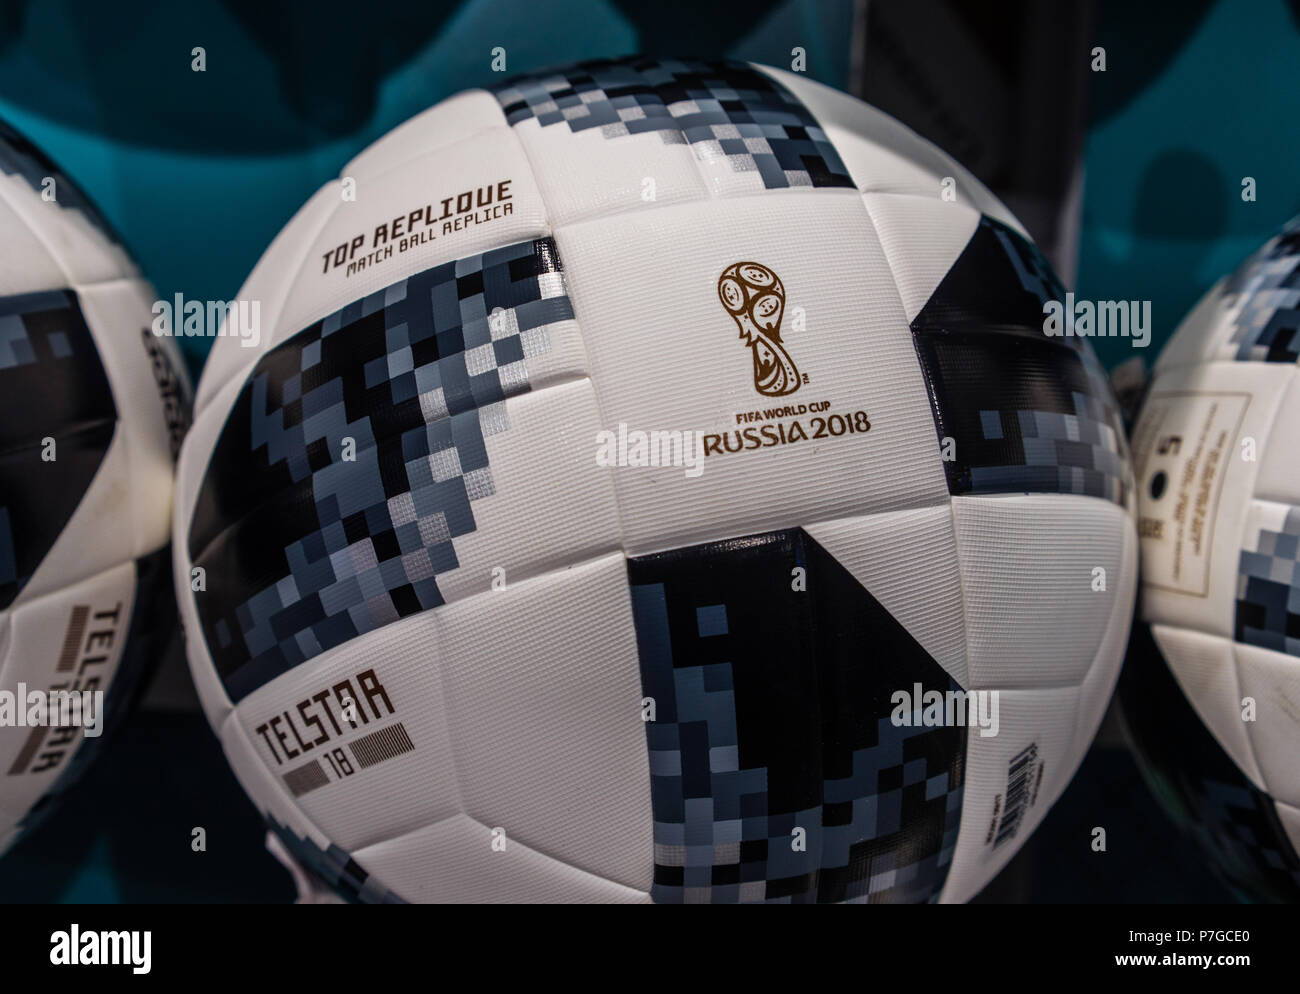 Londres Costa ideología 2 July 2018 Moscow, Russia The official ball for the FIFA World Cup 2018 Adidas  Telstar 18 Stock Photo - Alamy